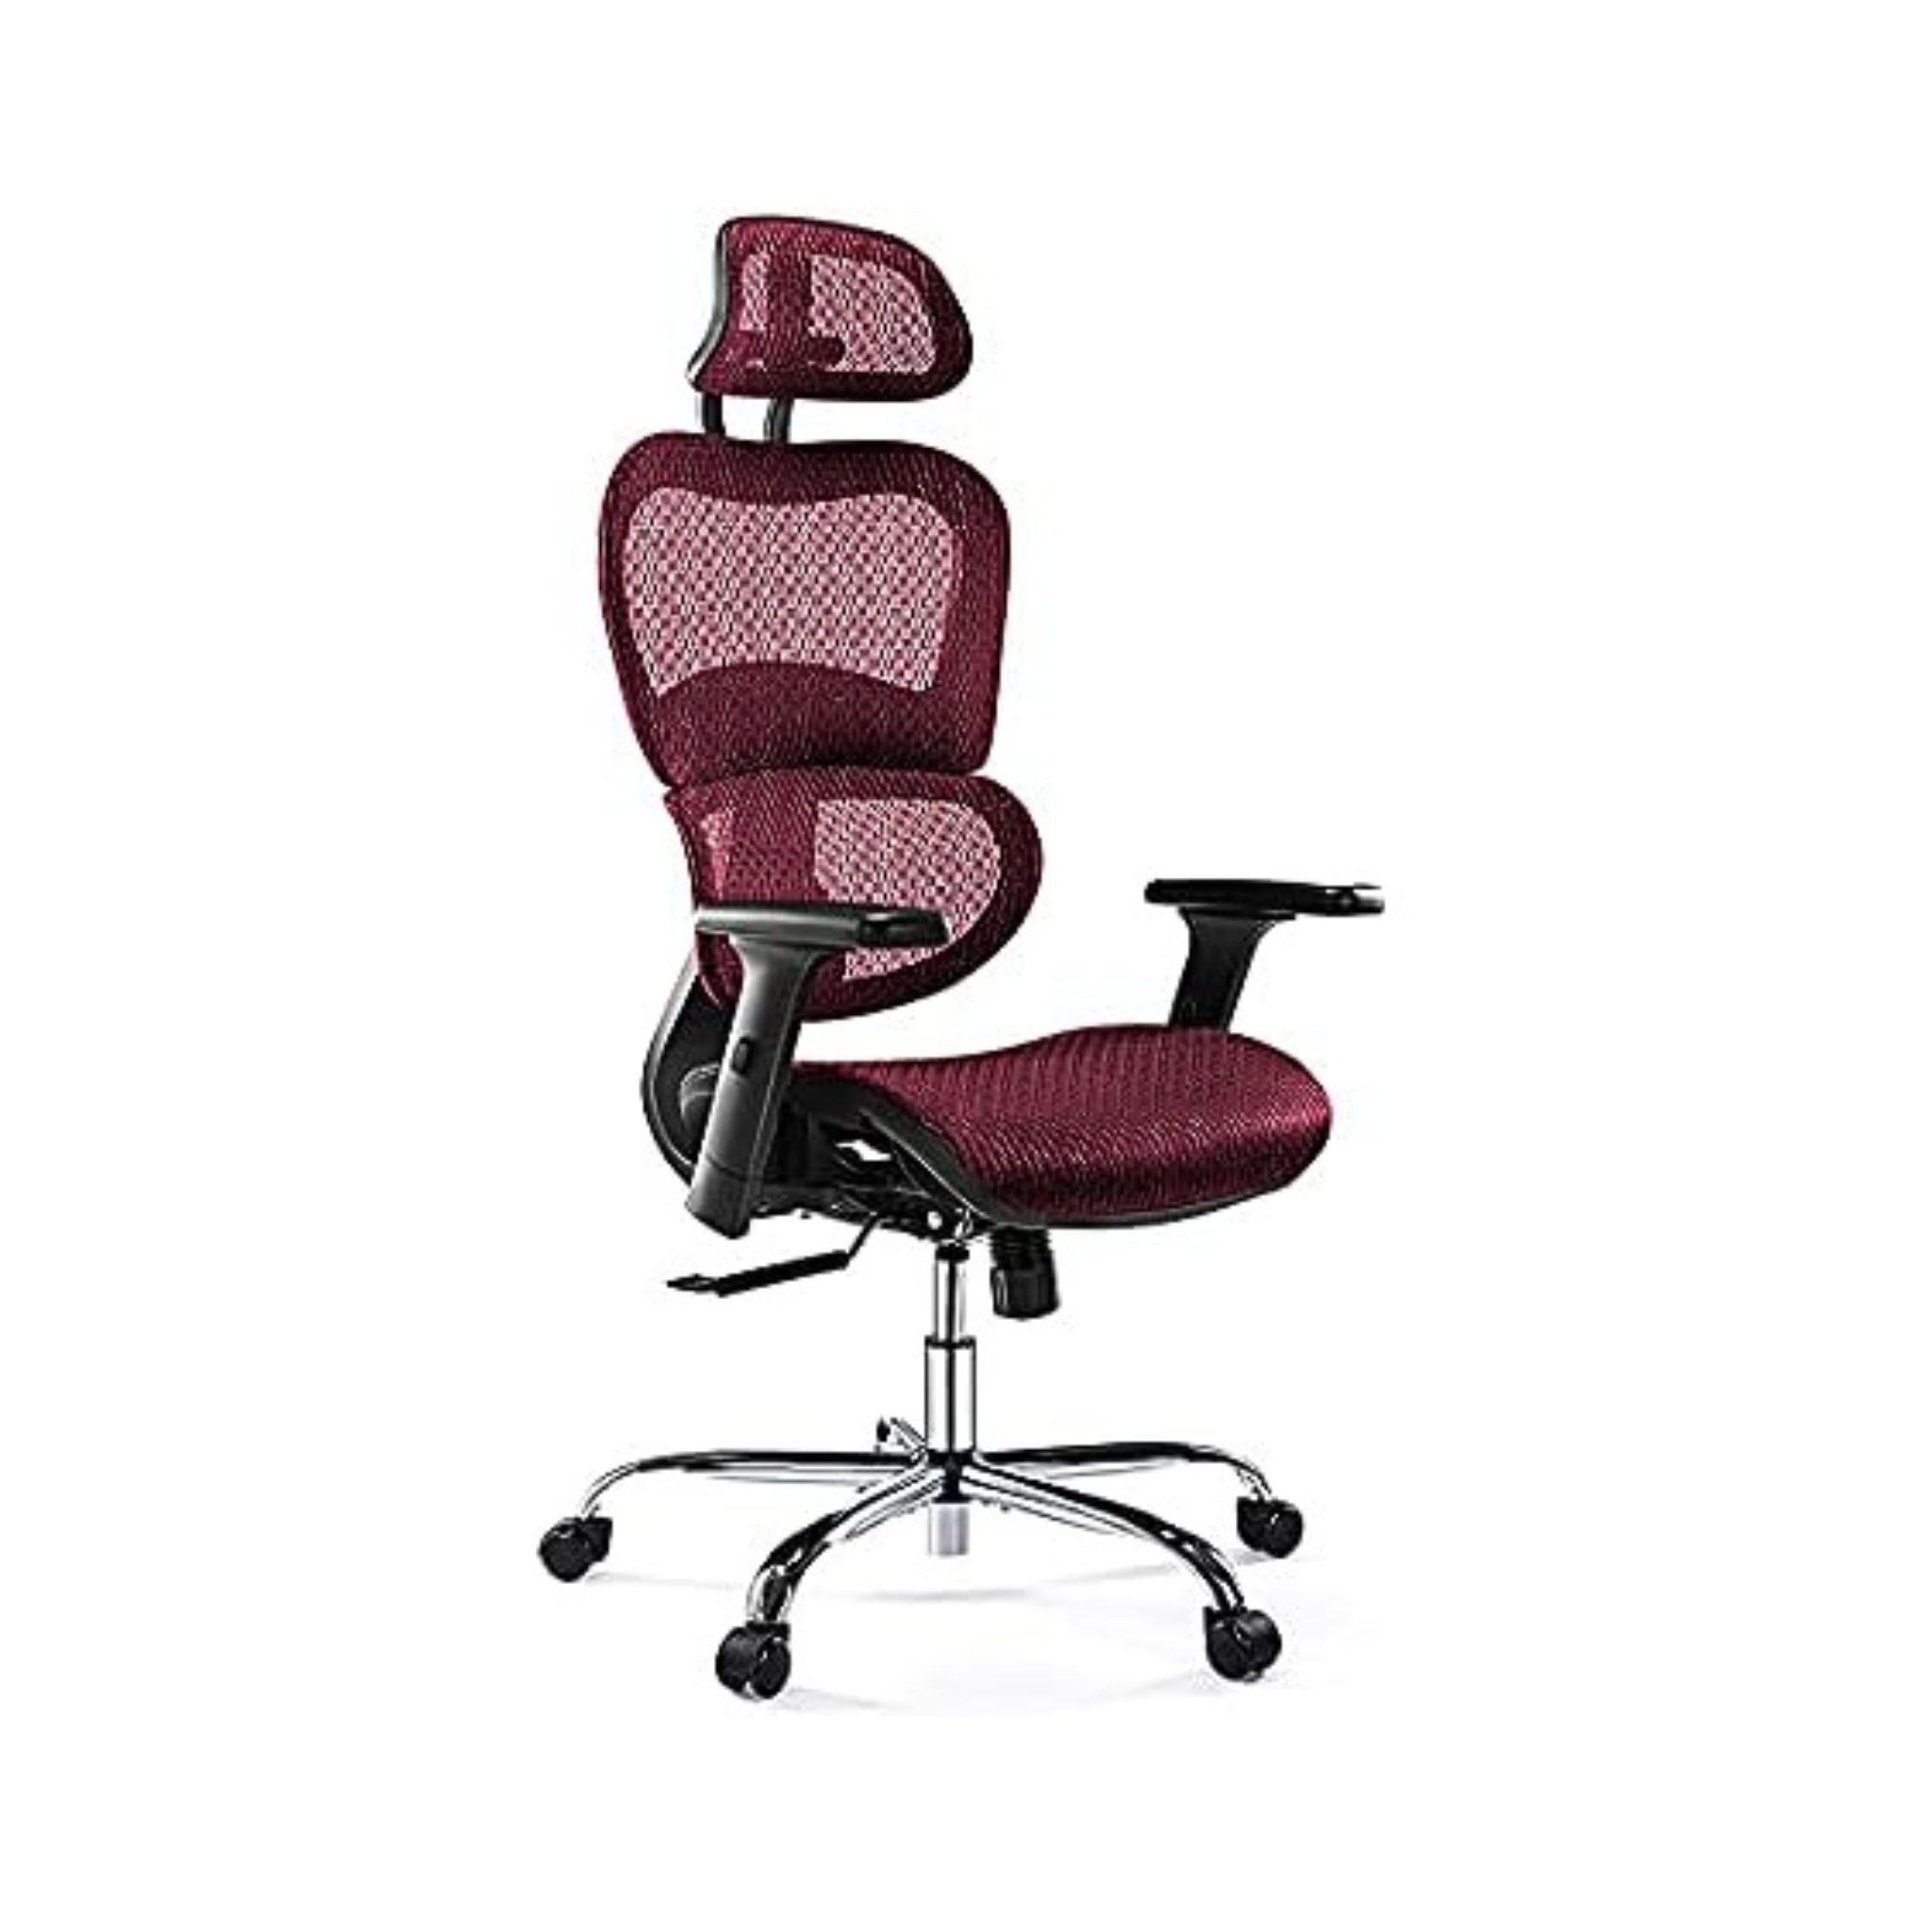 Save Big On Office Chairs